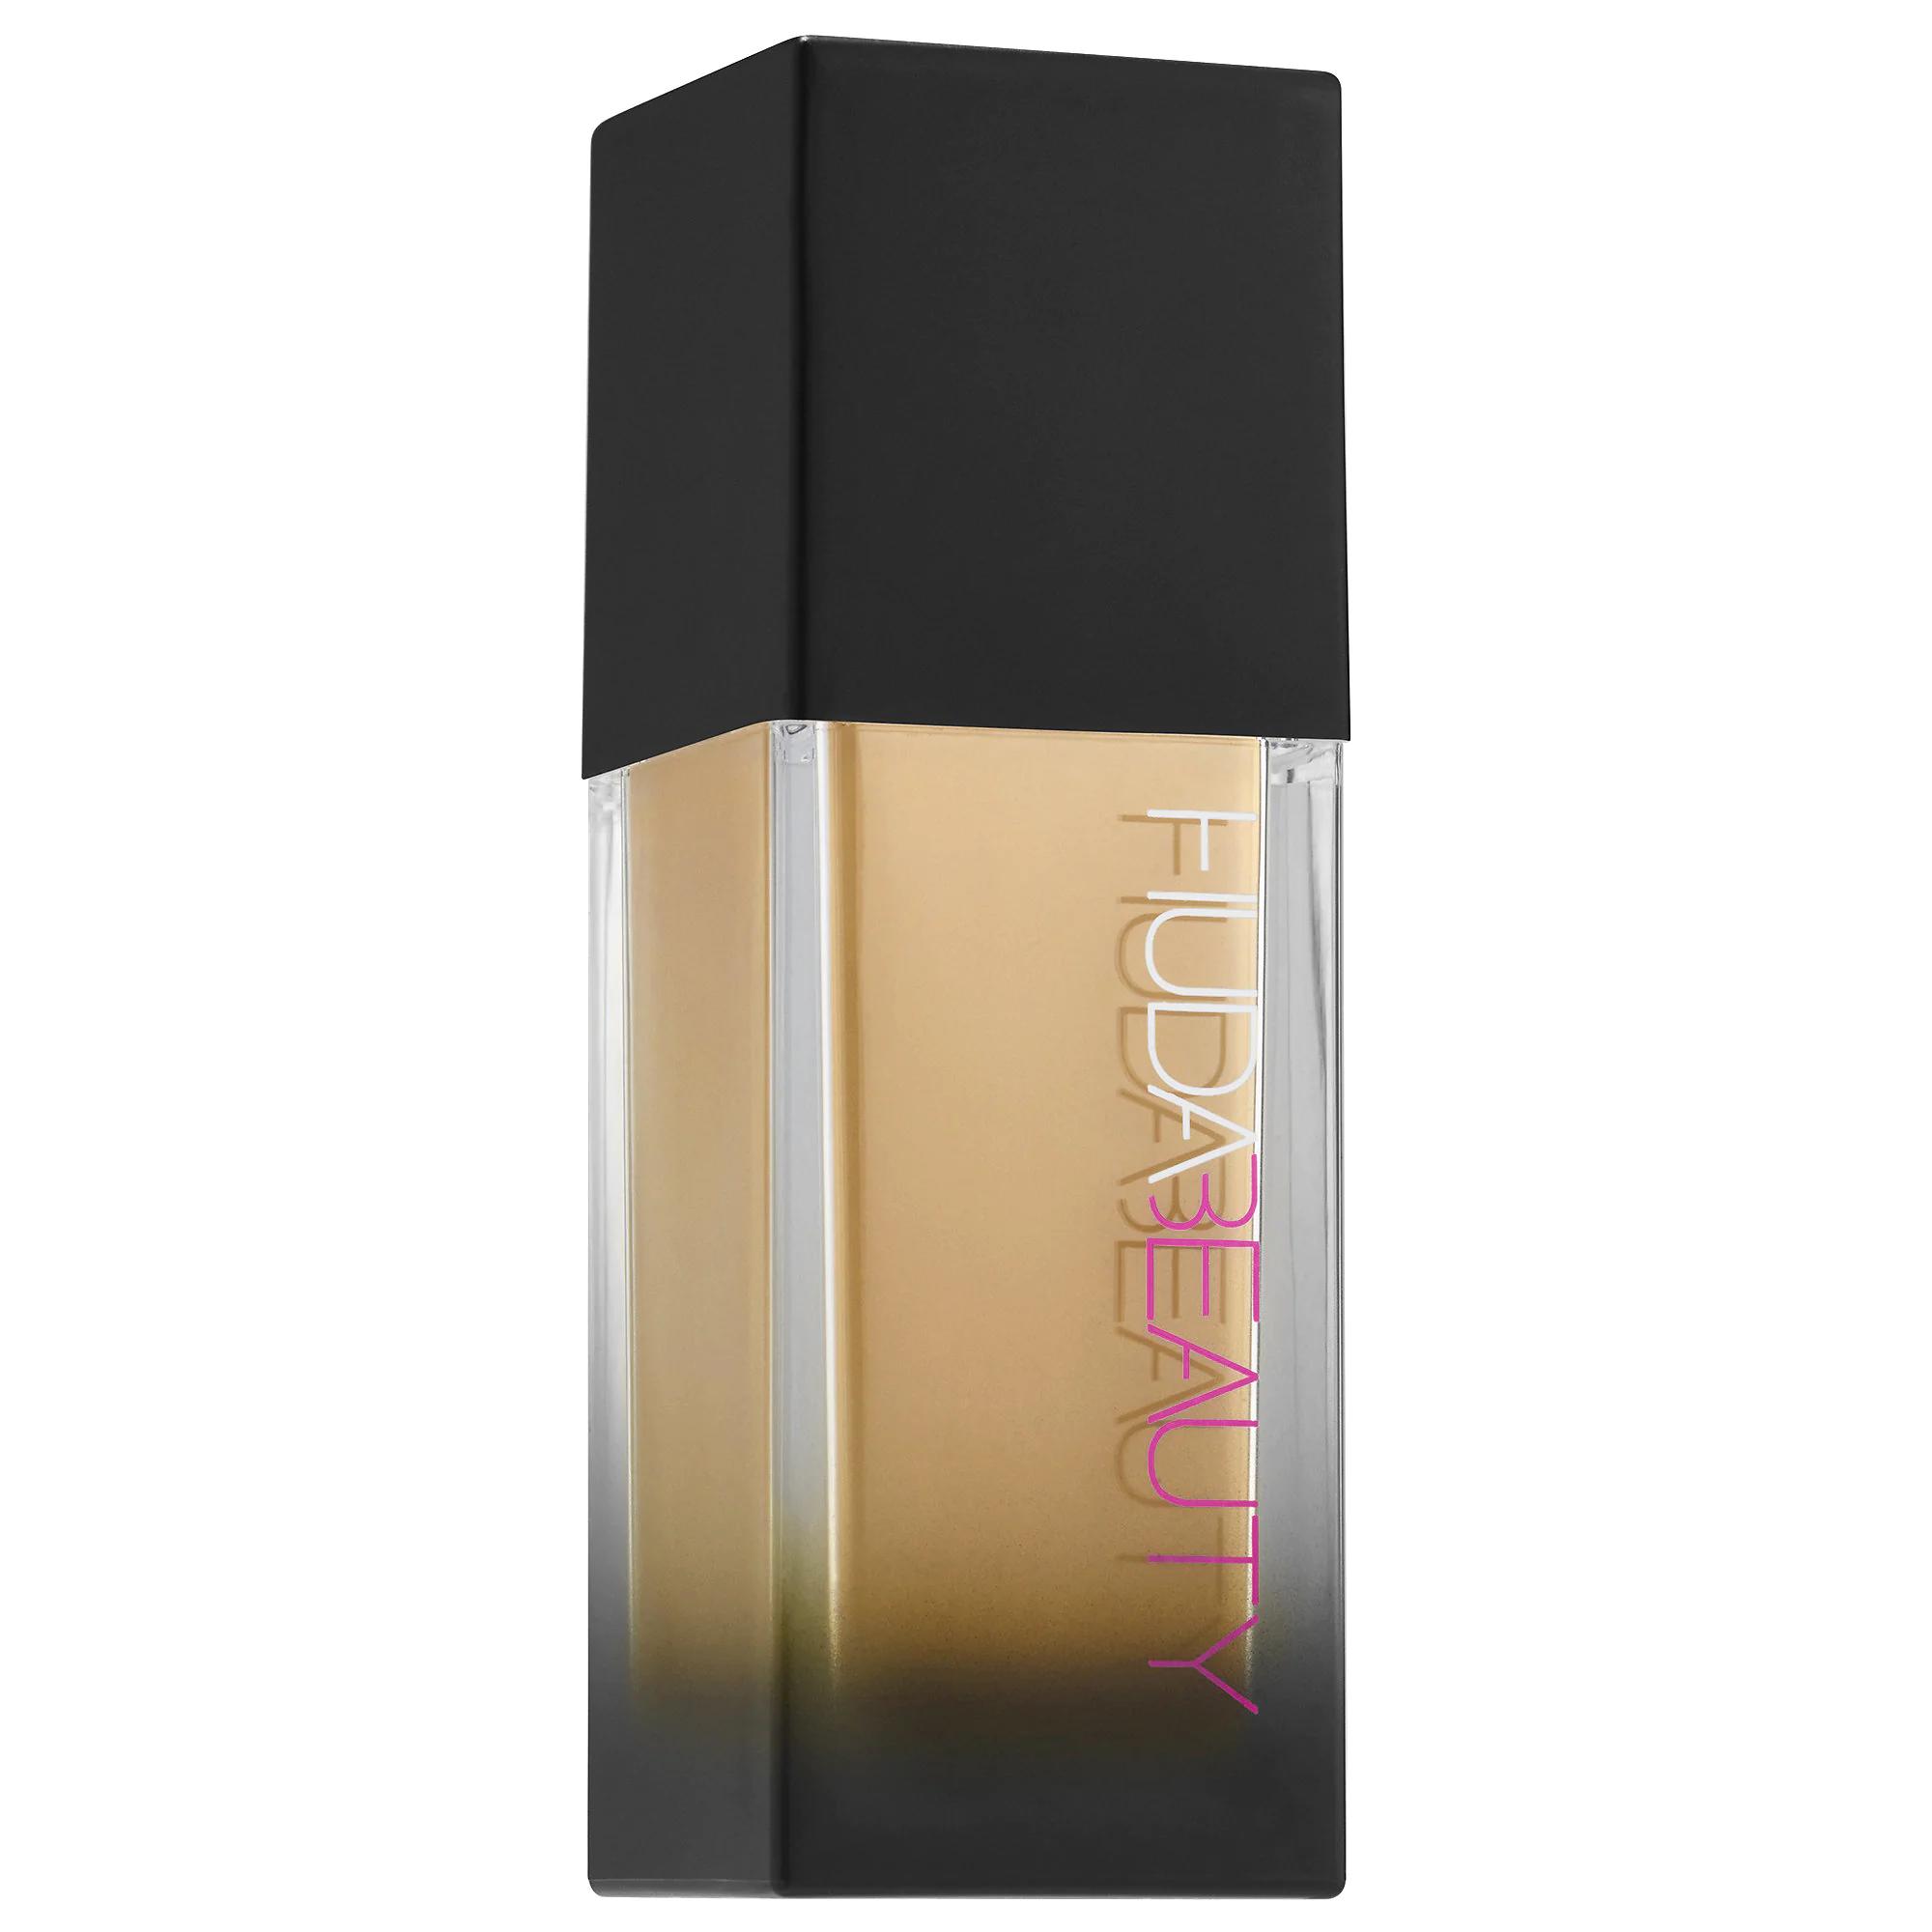 Huda Beauty #FauxFilter Foundation Toasted Coconut 240N